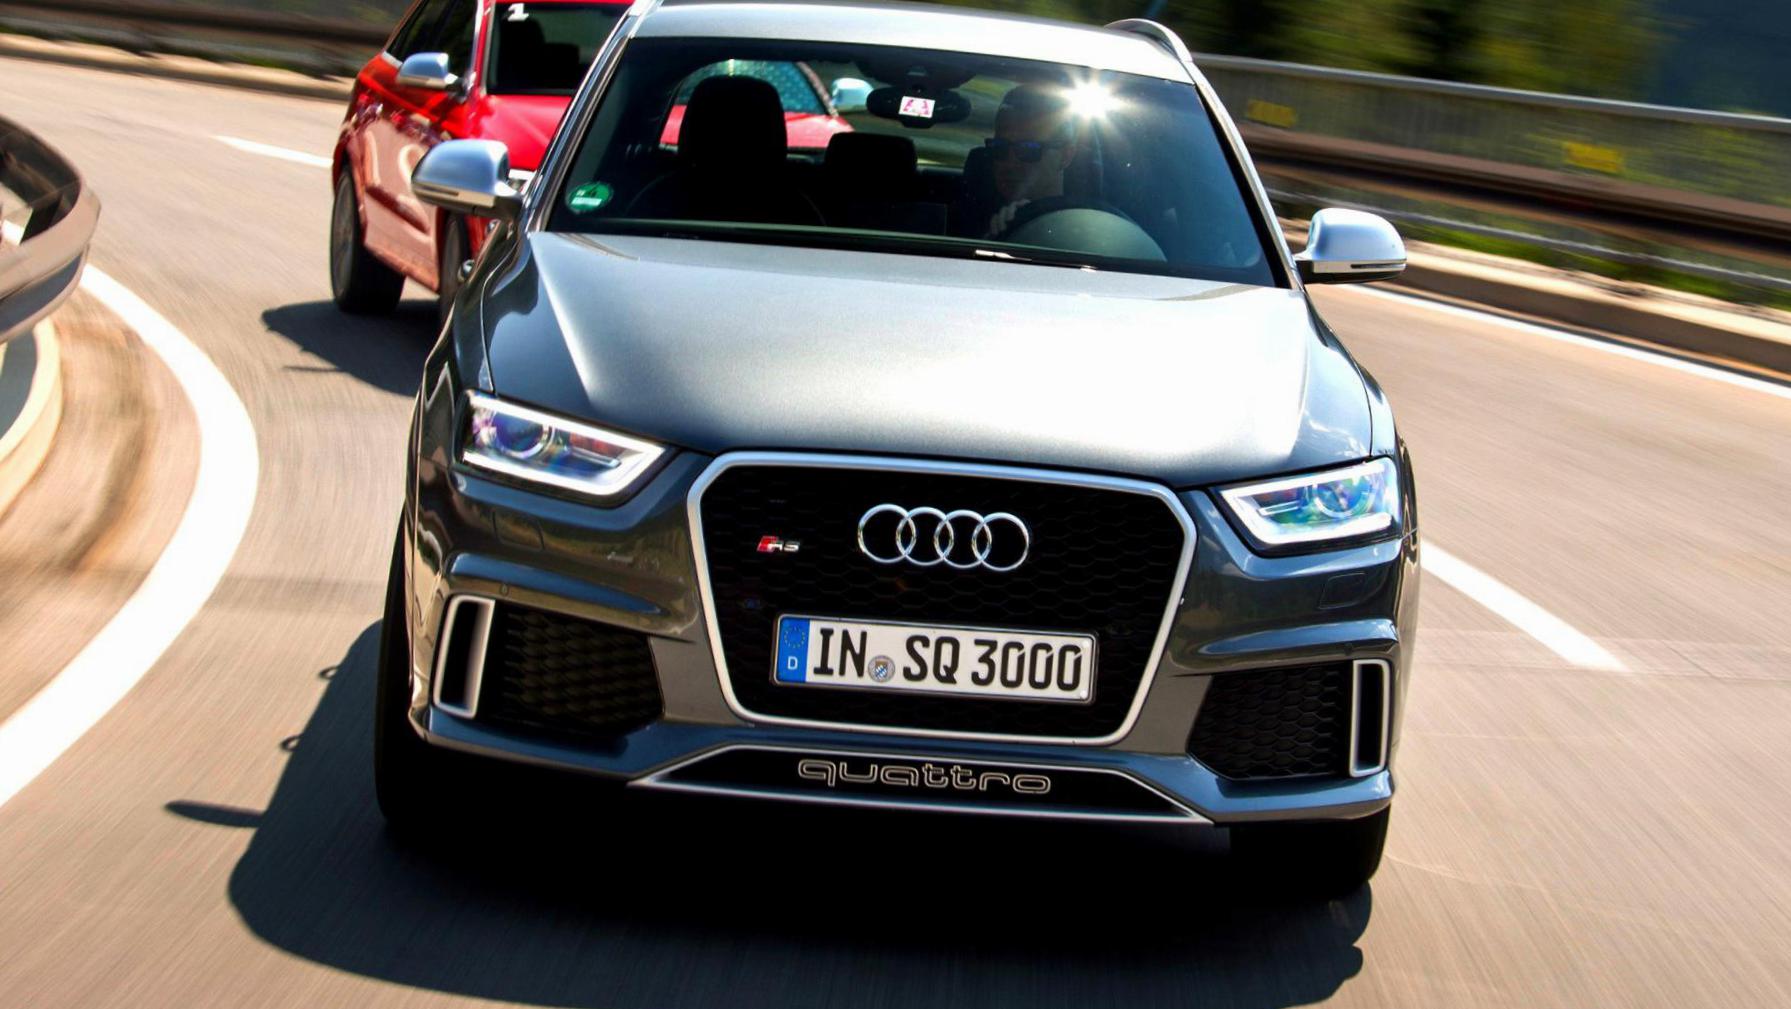 Audi Rs Q3 Photos And Specs Photo Audi Rs Q3 For Sale And 26 Perfect Photos Of Audi Rs Q3